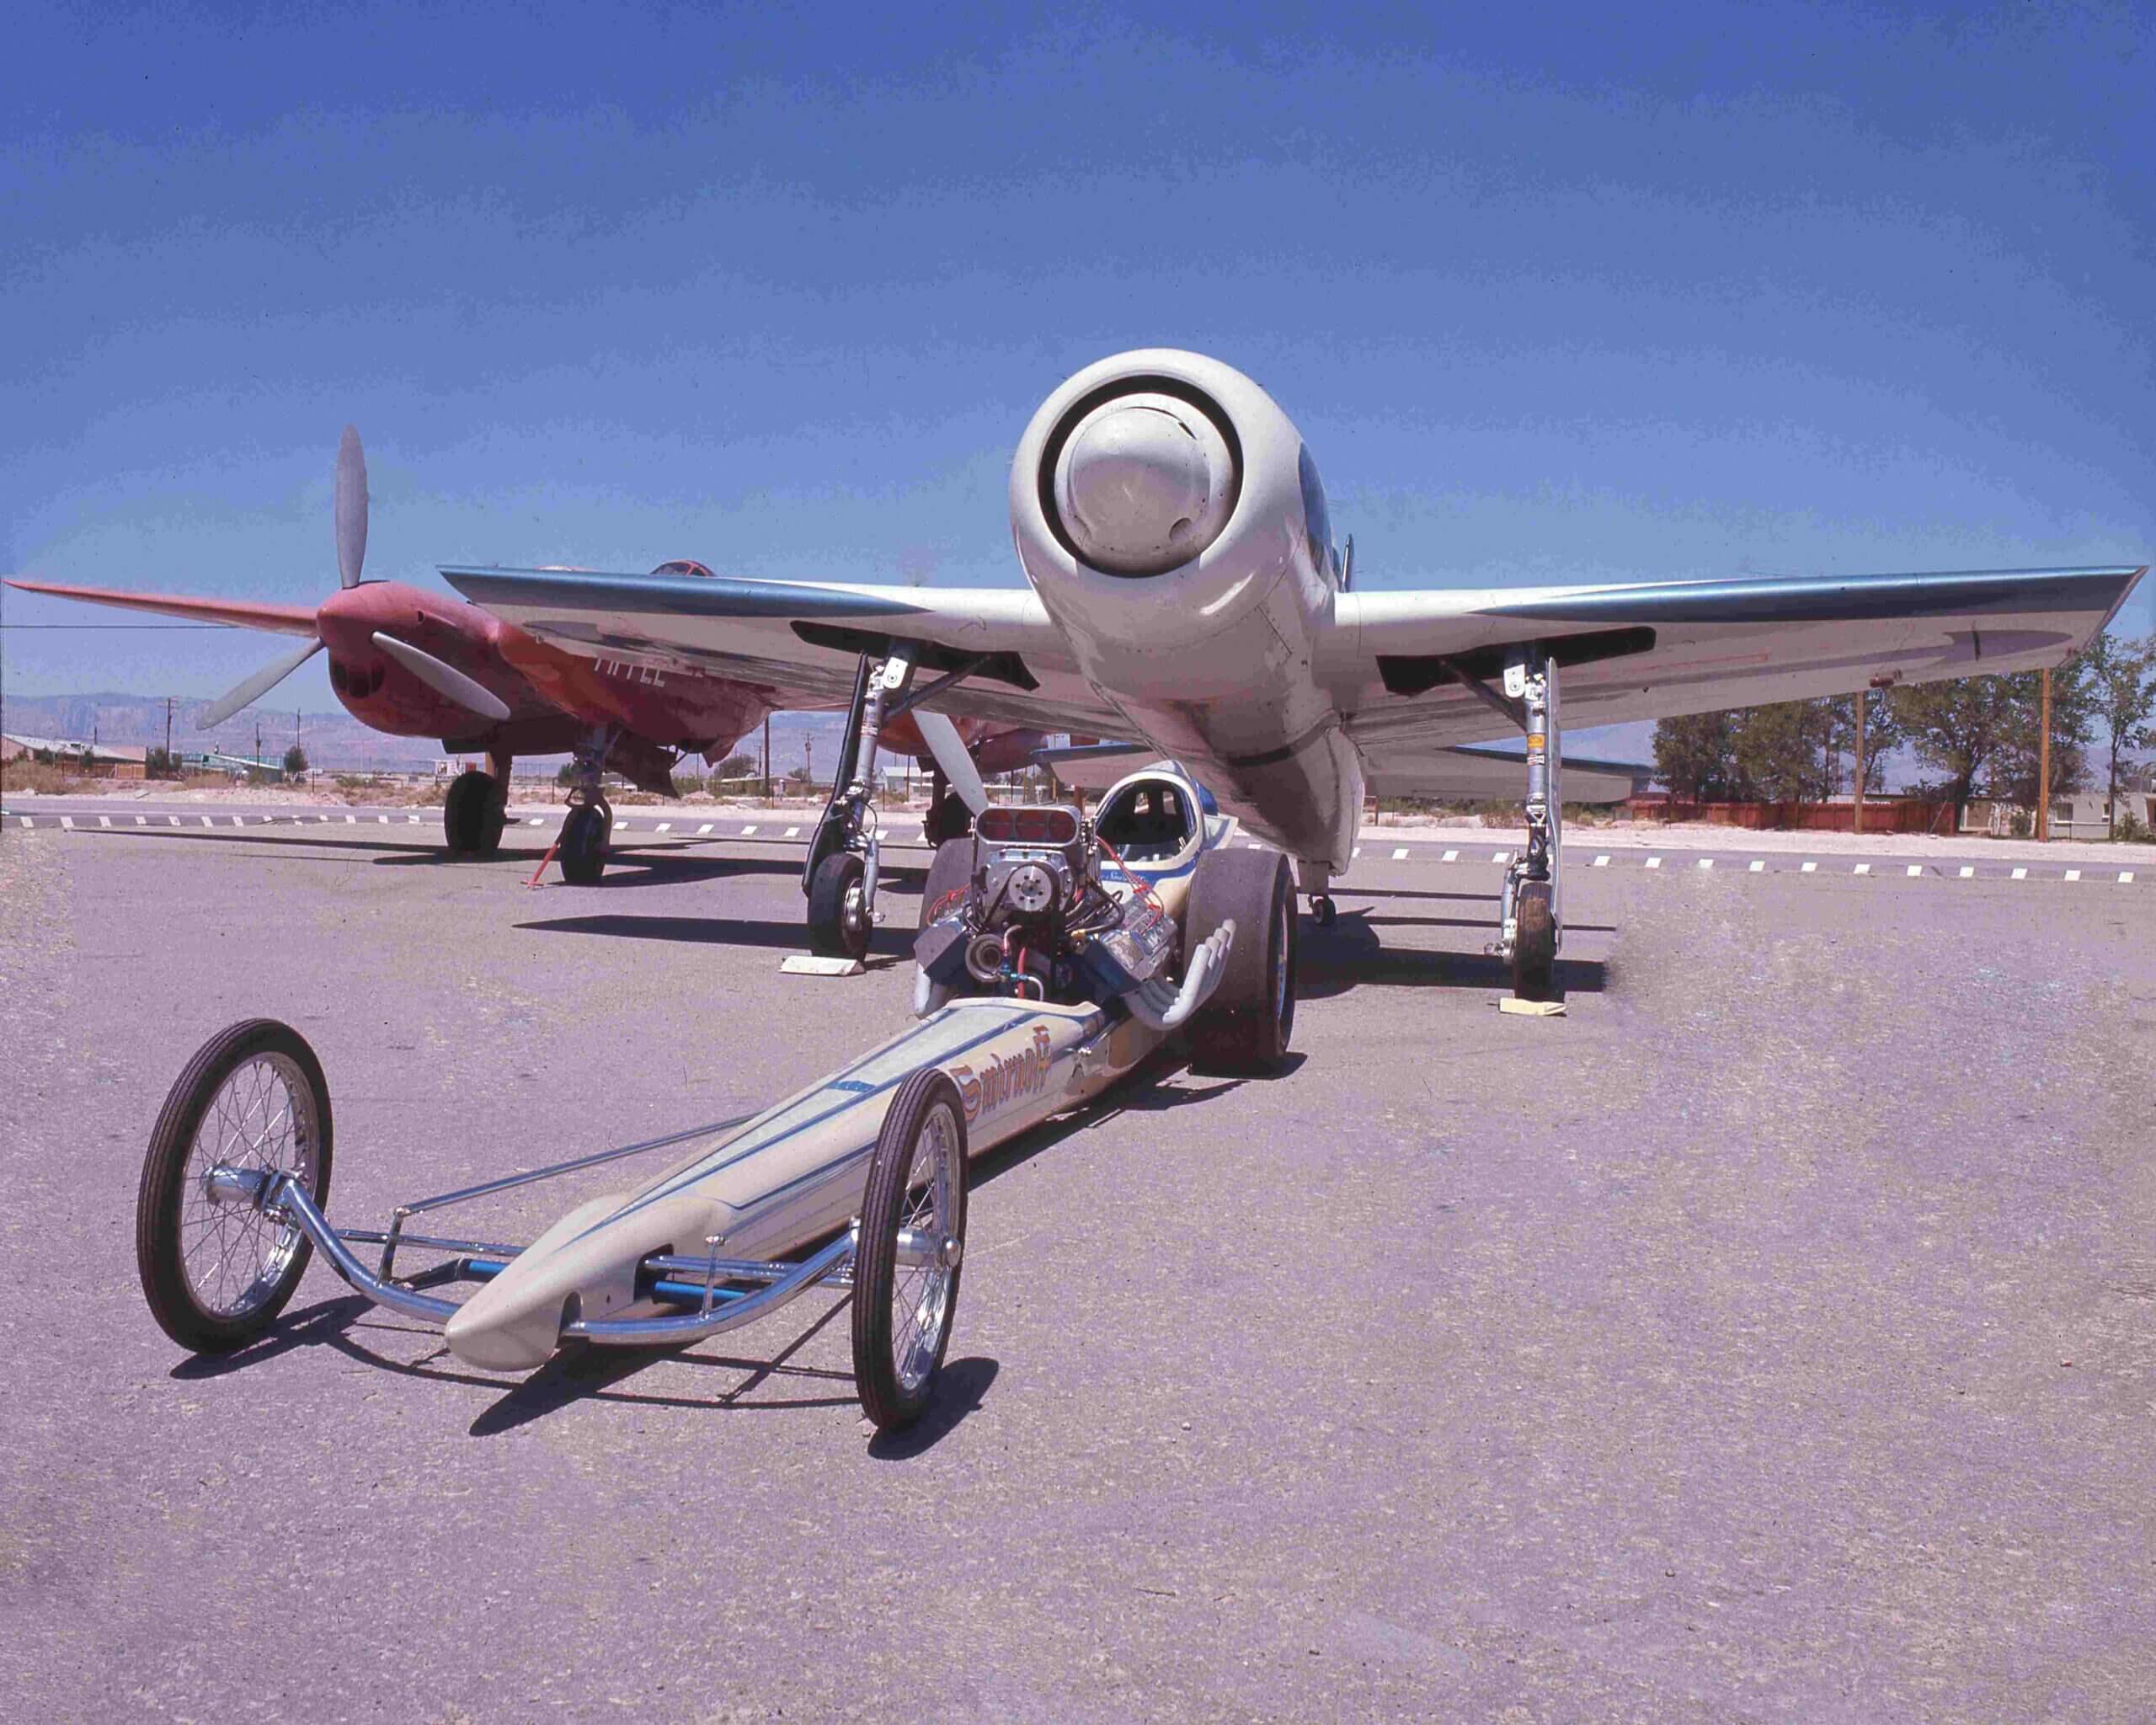 A vintage picture of a sports motor with an airplane